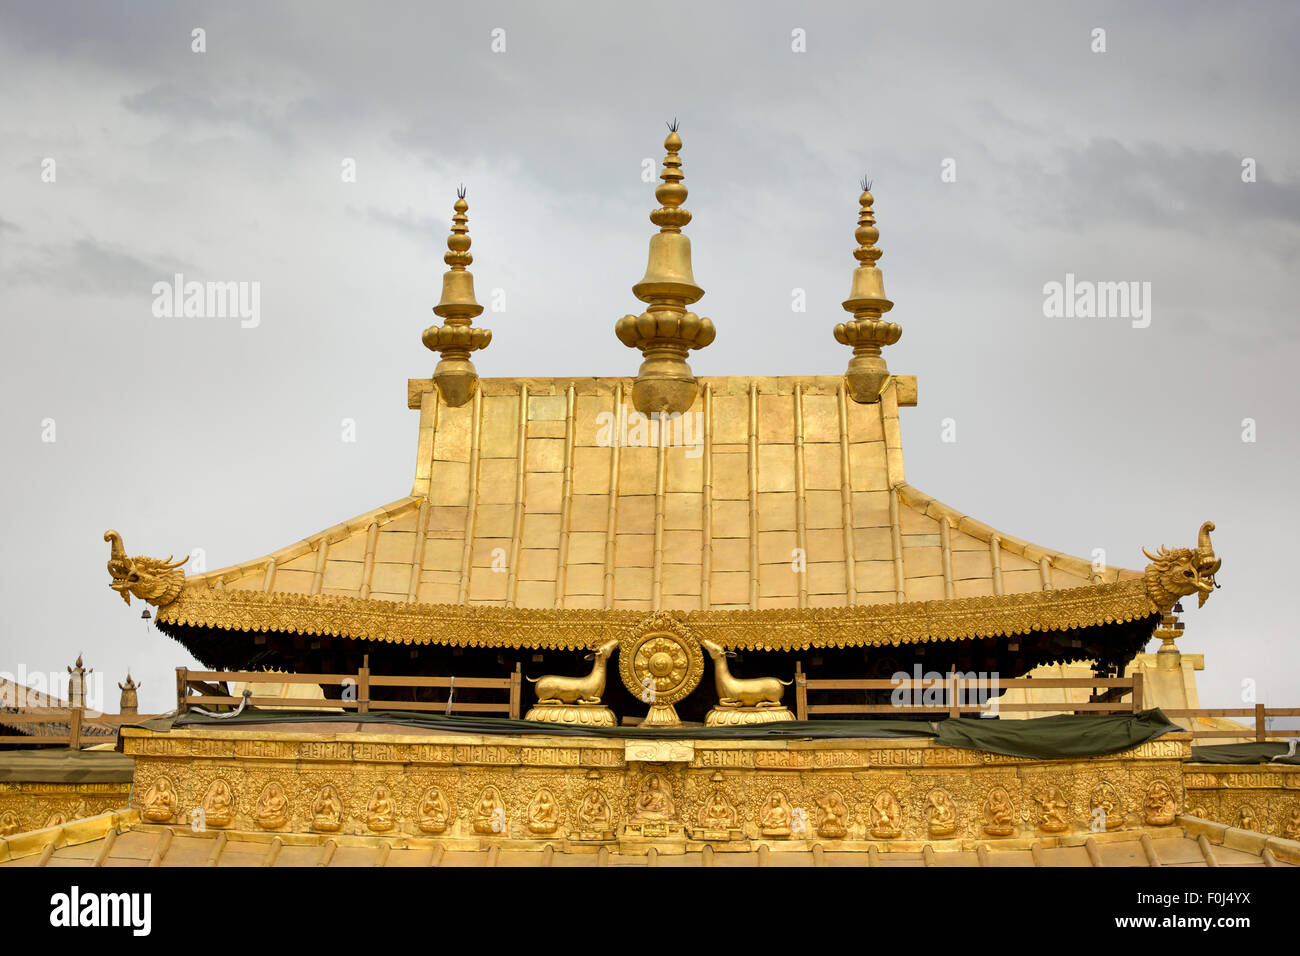 Cloudy sky and detail of the golden roof from the Jokhang Temple in Lhasa, Tibet. Stock Photo